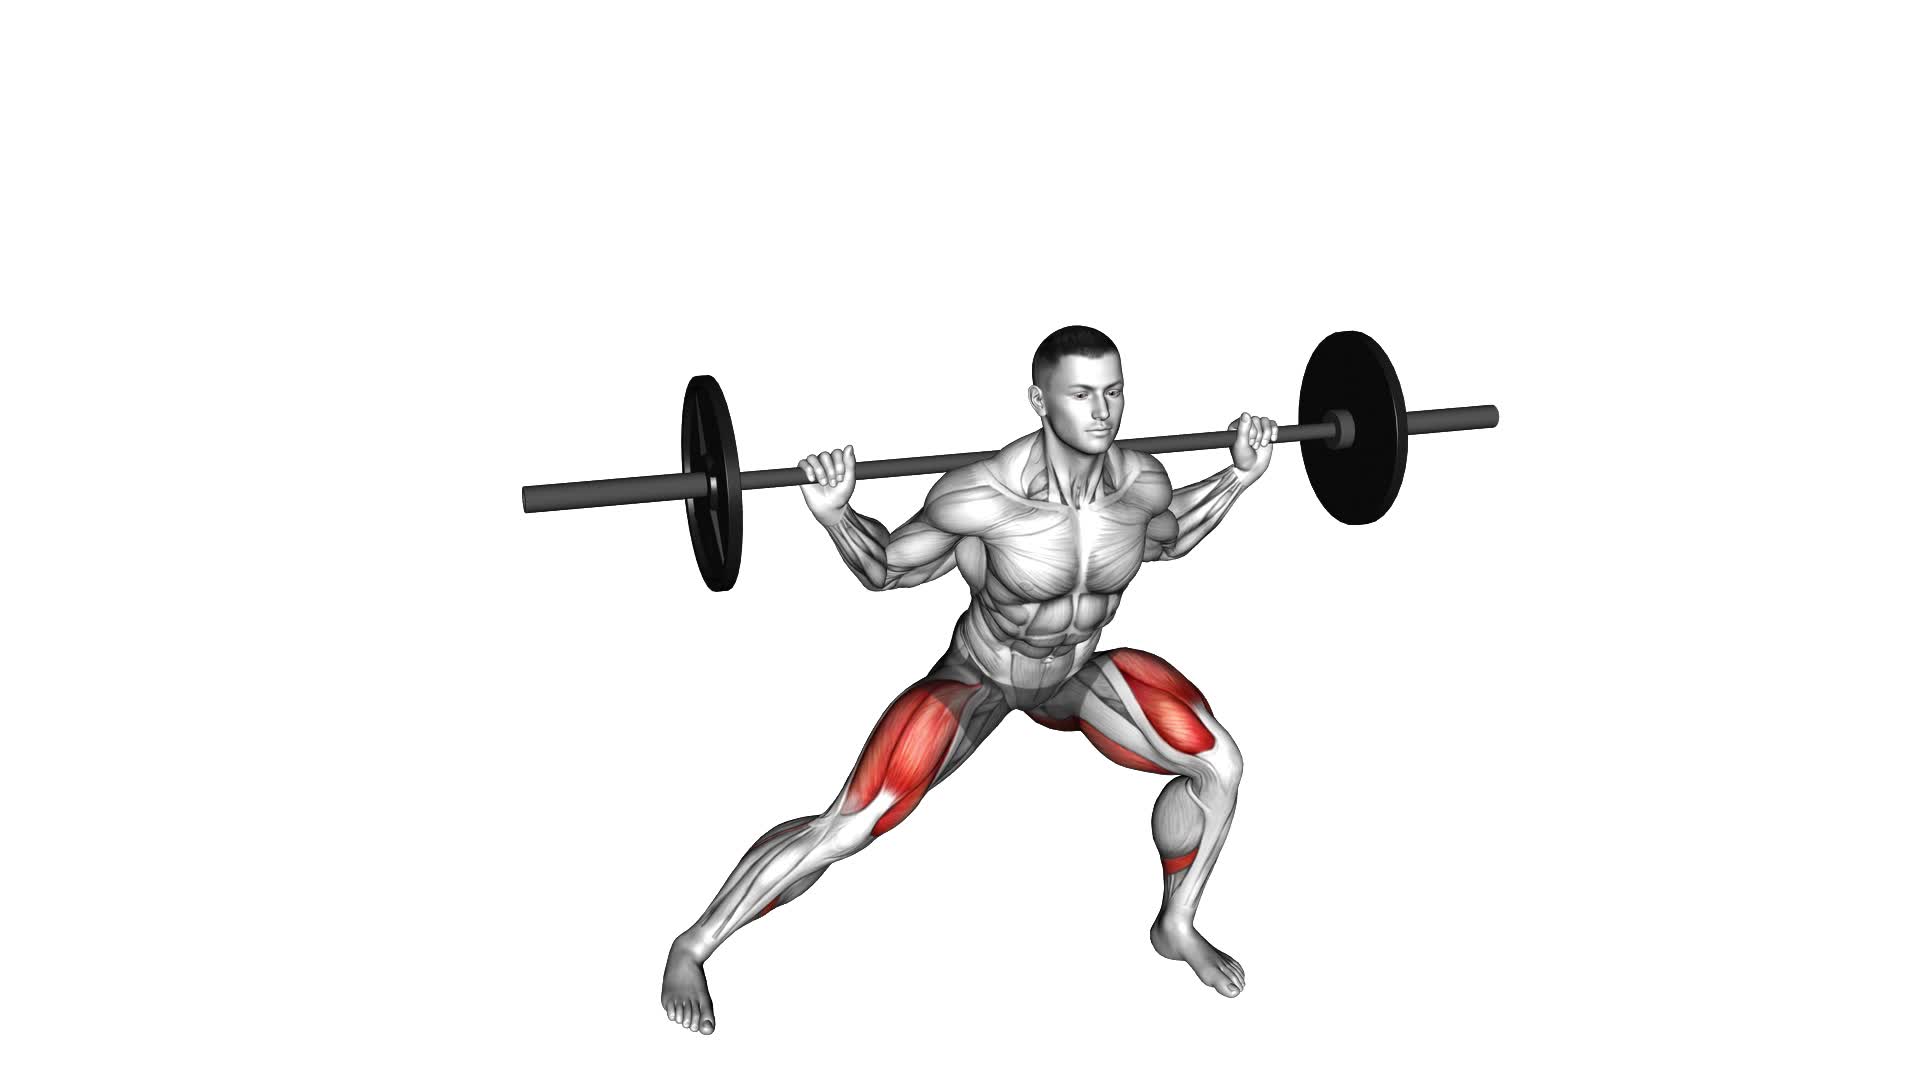 Barbell Lateral Lunge - Video Exercise Guide & Tips